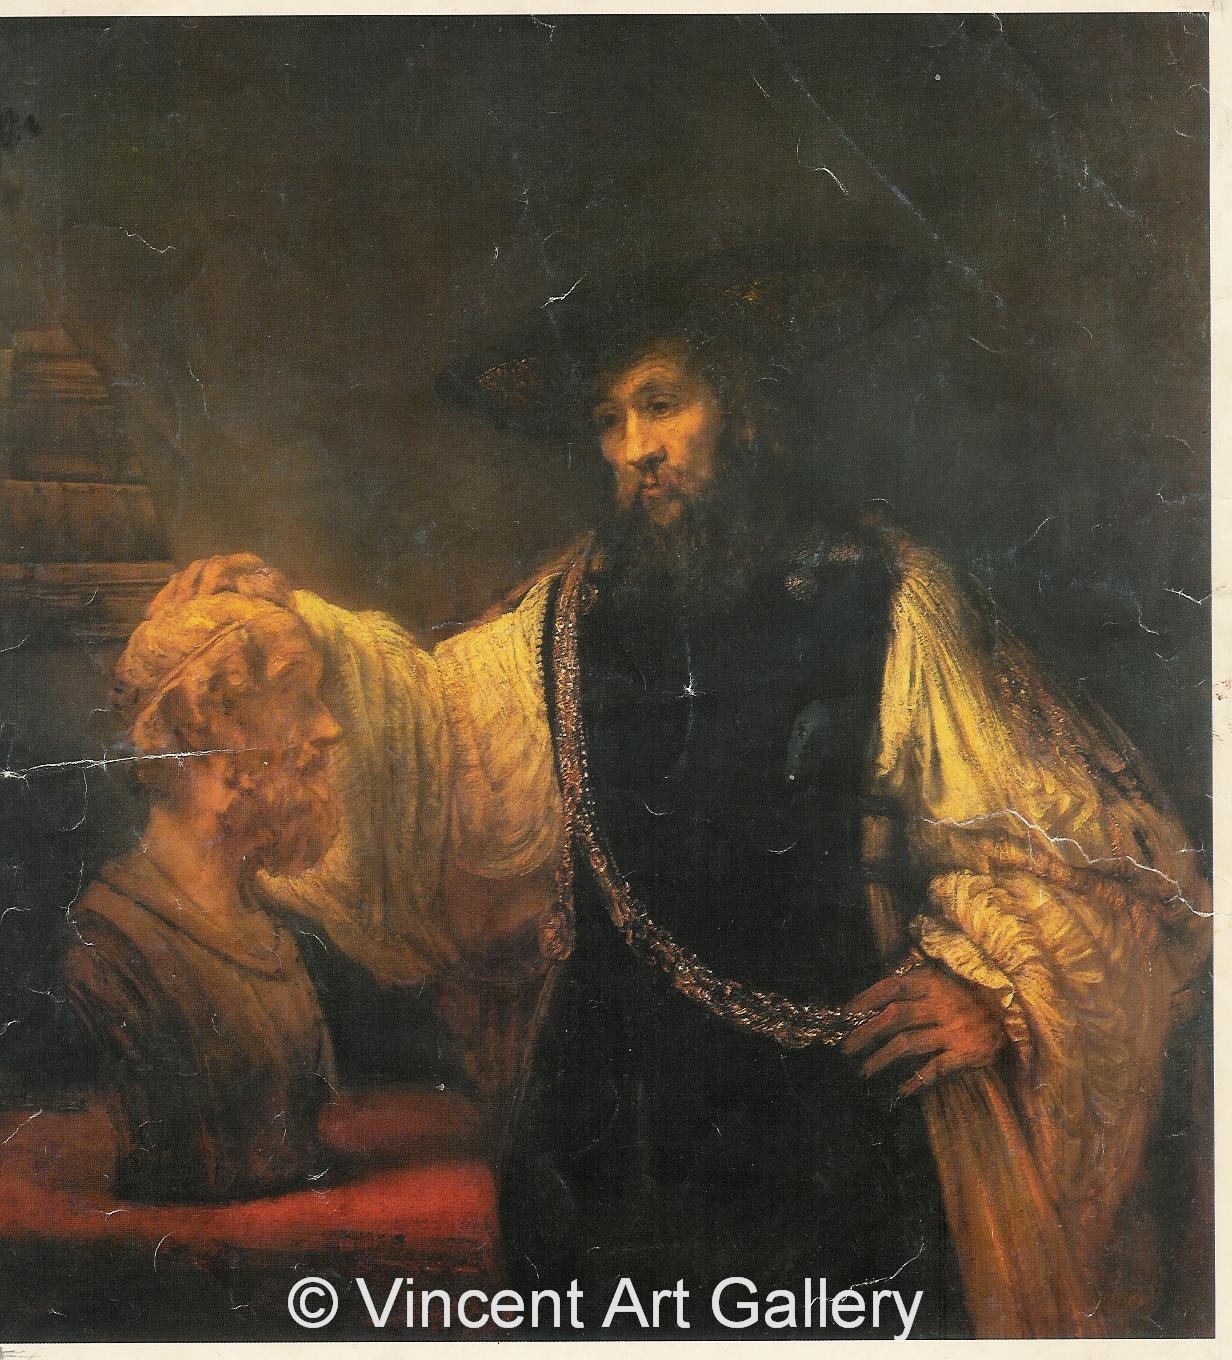 A577, REMBRANDT, Aristotle contemplating a Bust of Homer